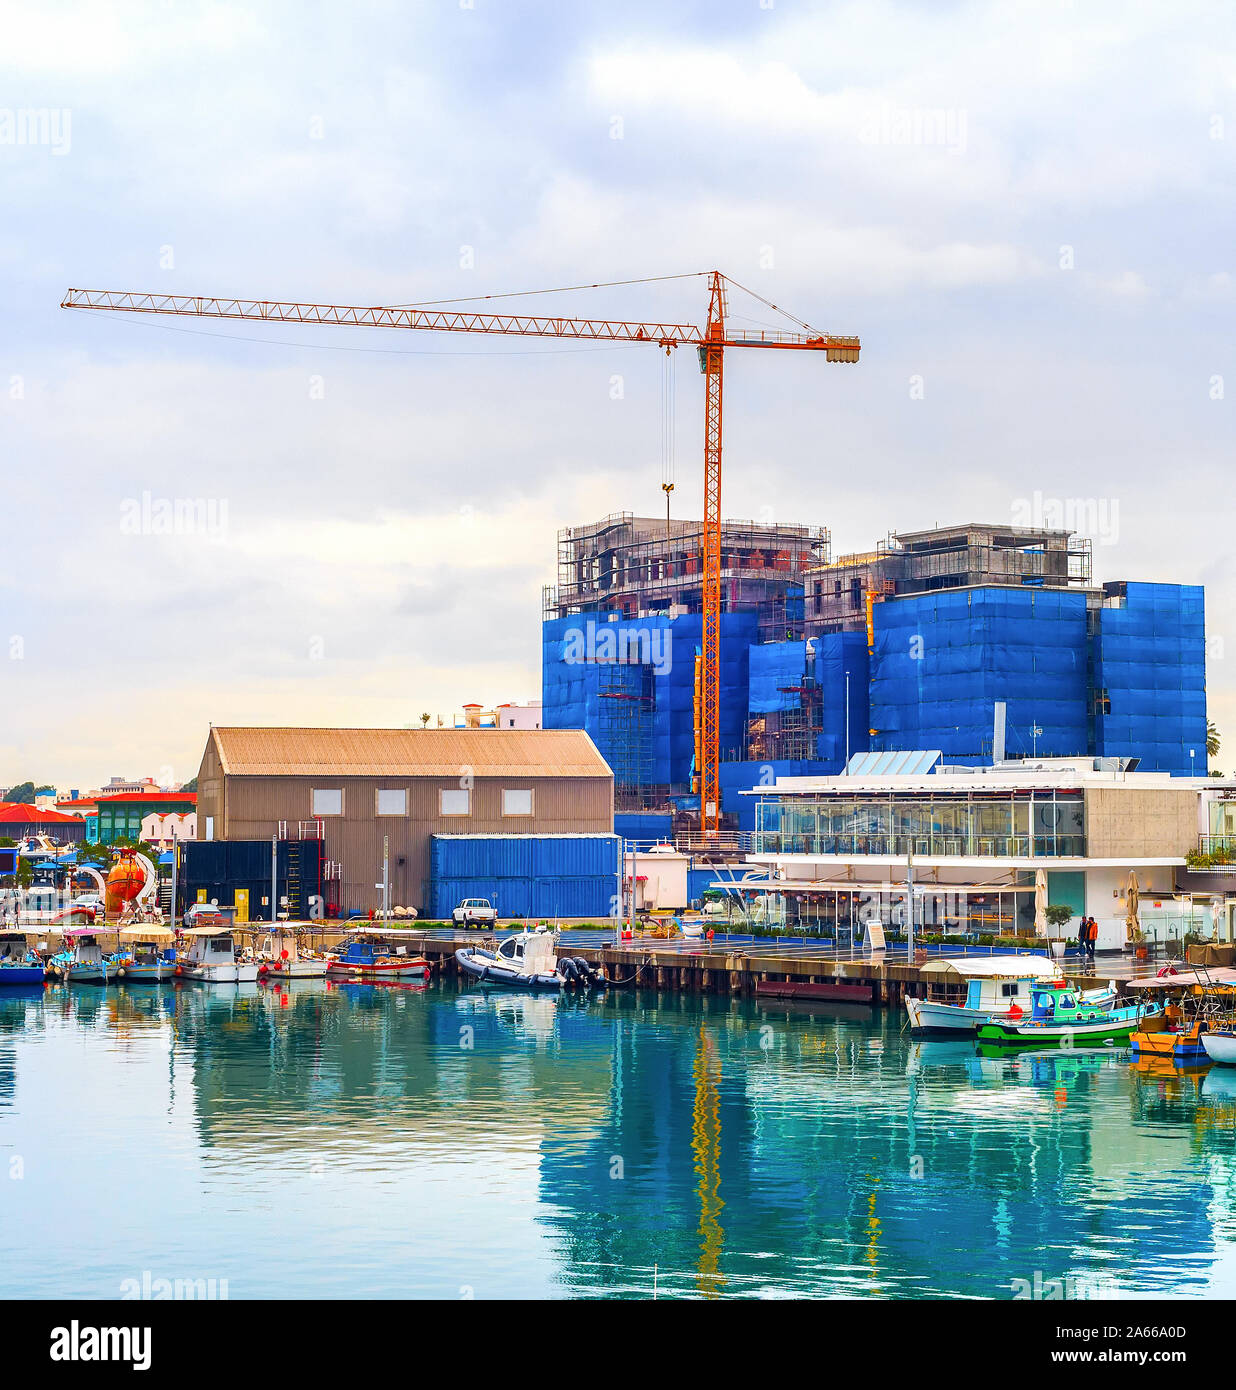 Construction site by Limassol waterfront, boats moored in marina with cafes and restaurants, Cyprus Stock Photo